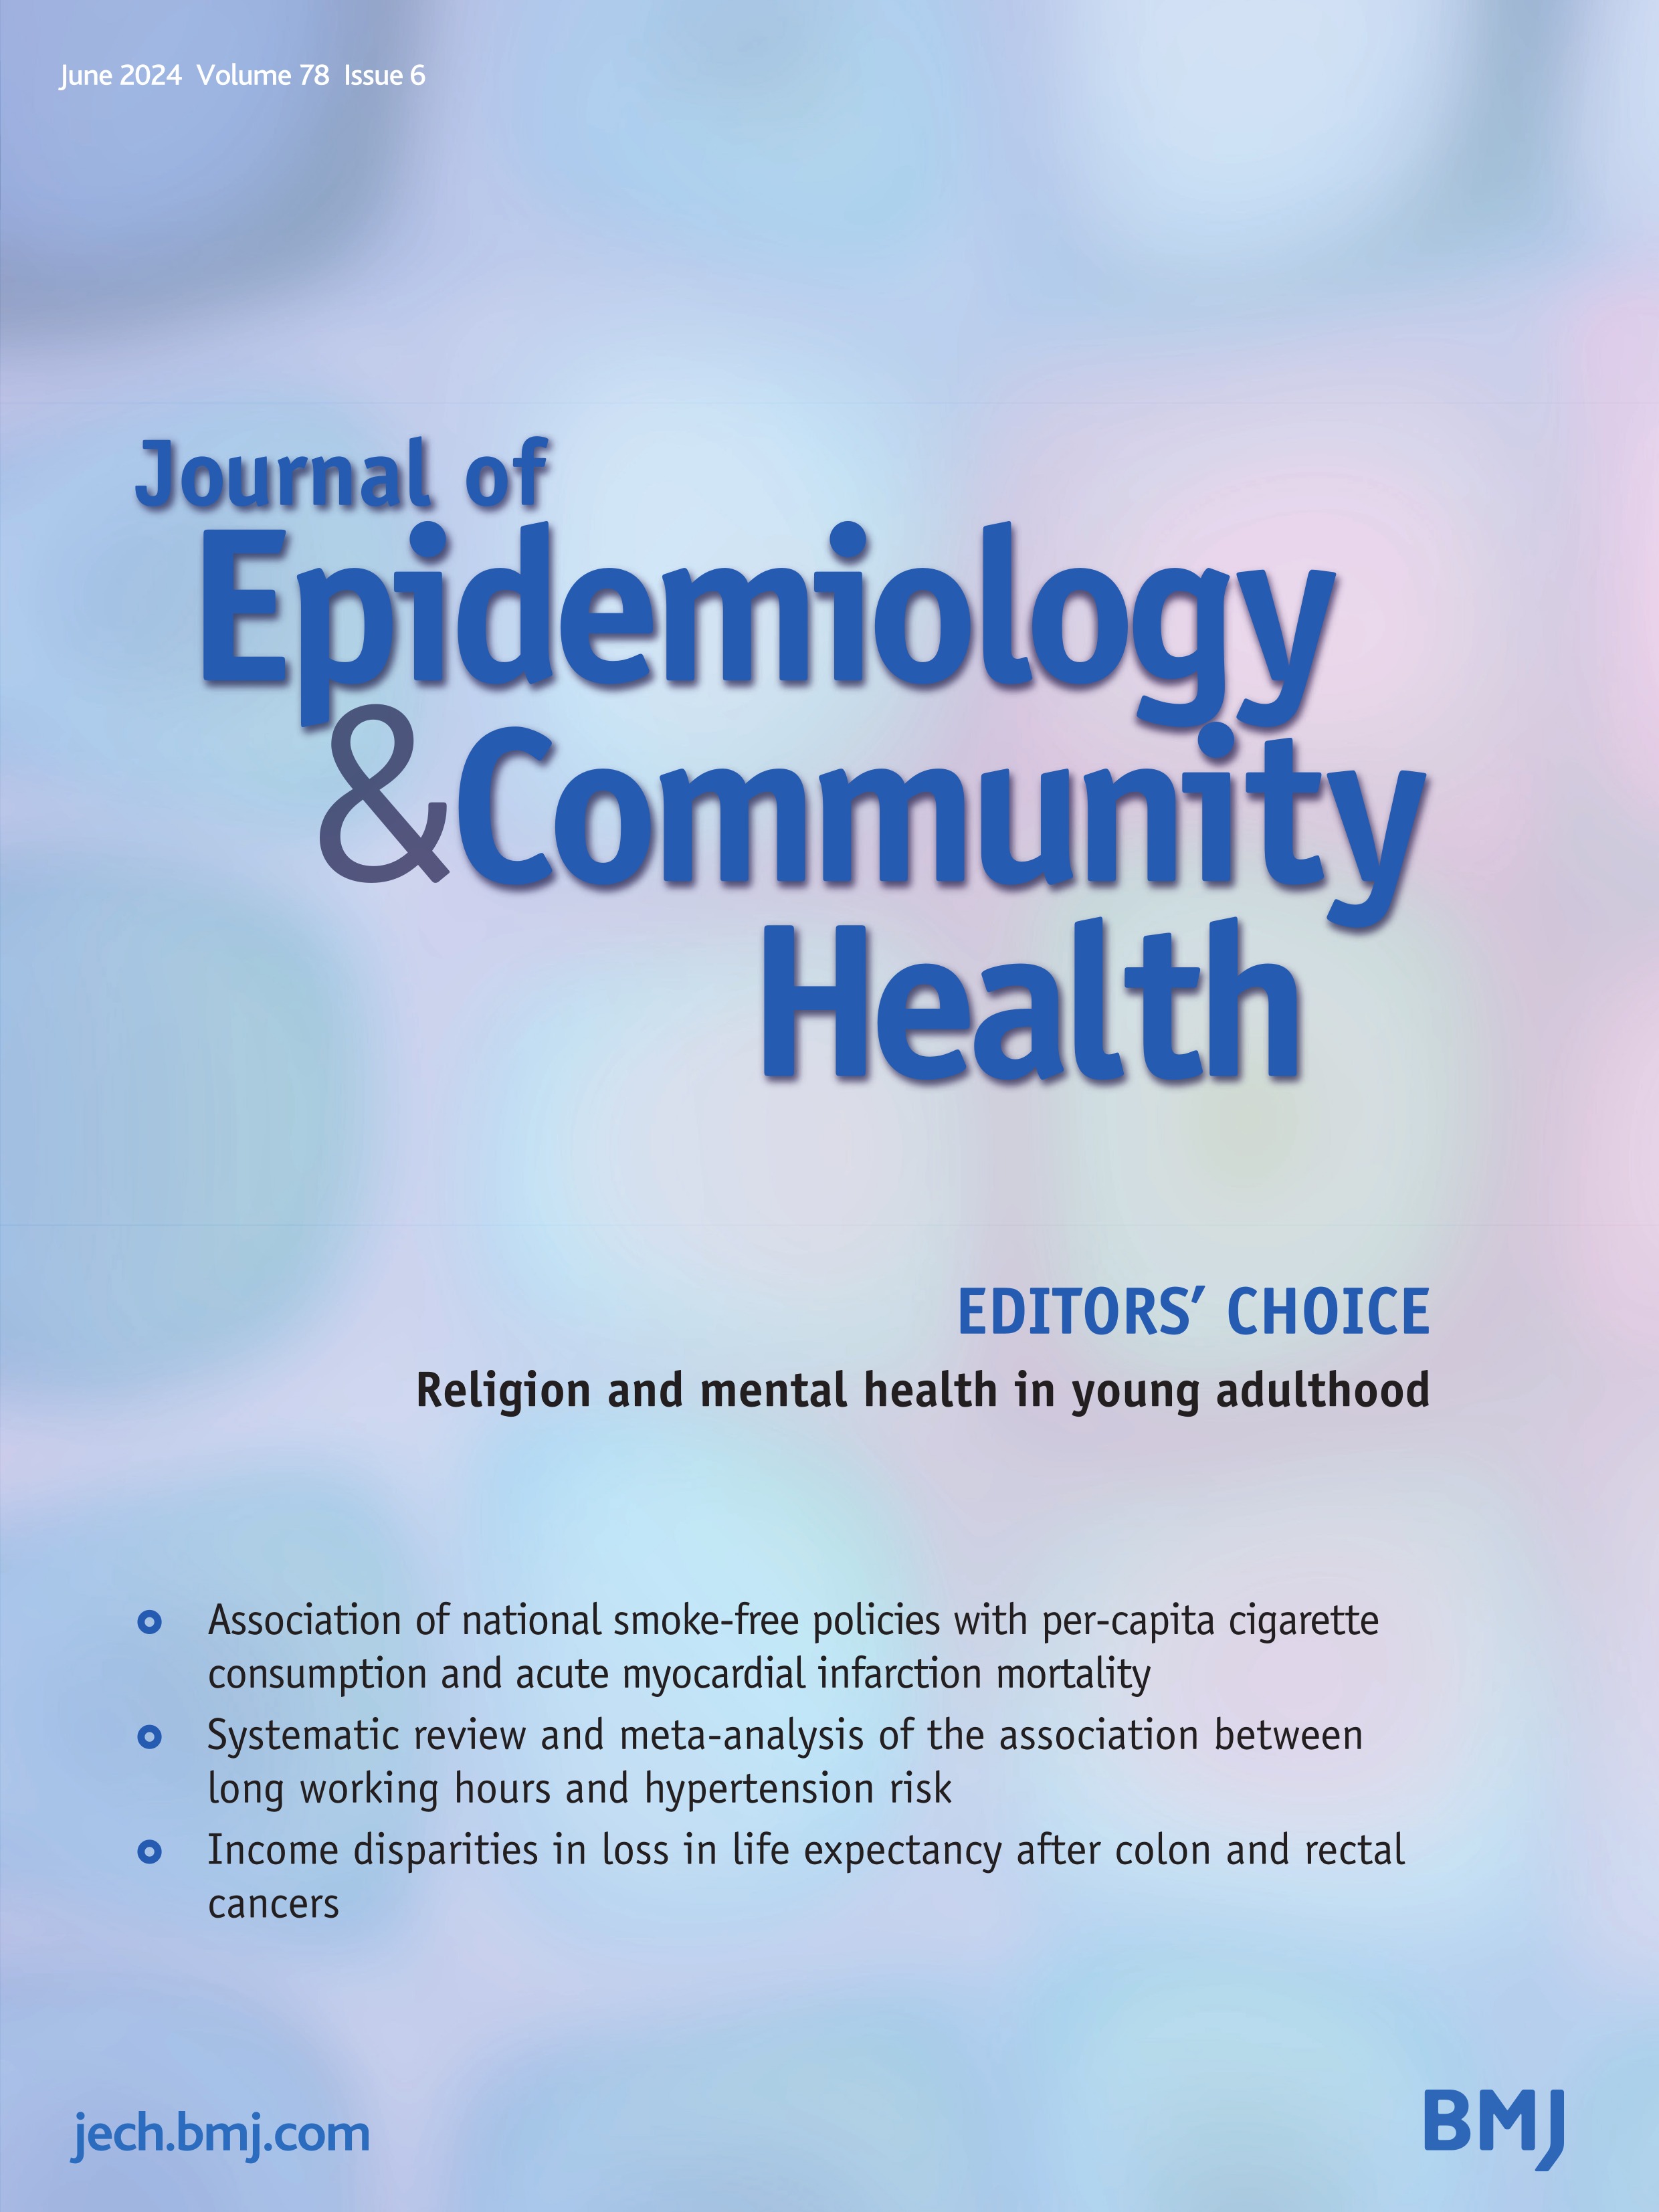 Socioeconomic disparities in diet and physical activity in children: evidence from well-child visit electronic health records in the Canary Islands, Spain